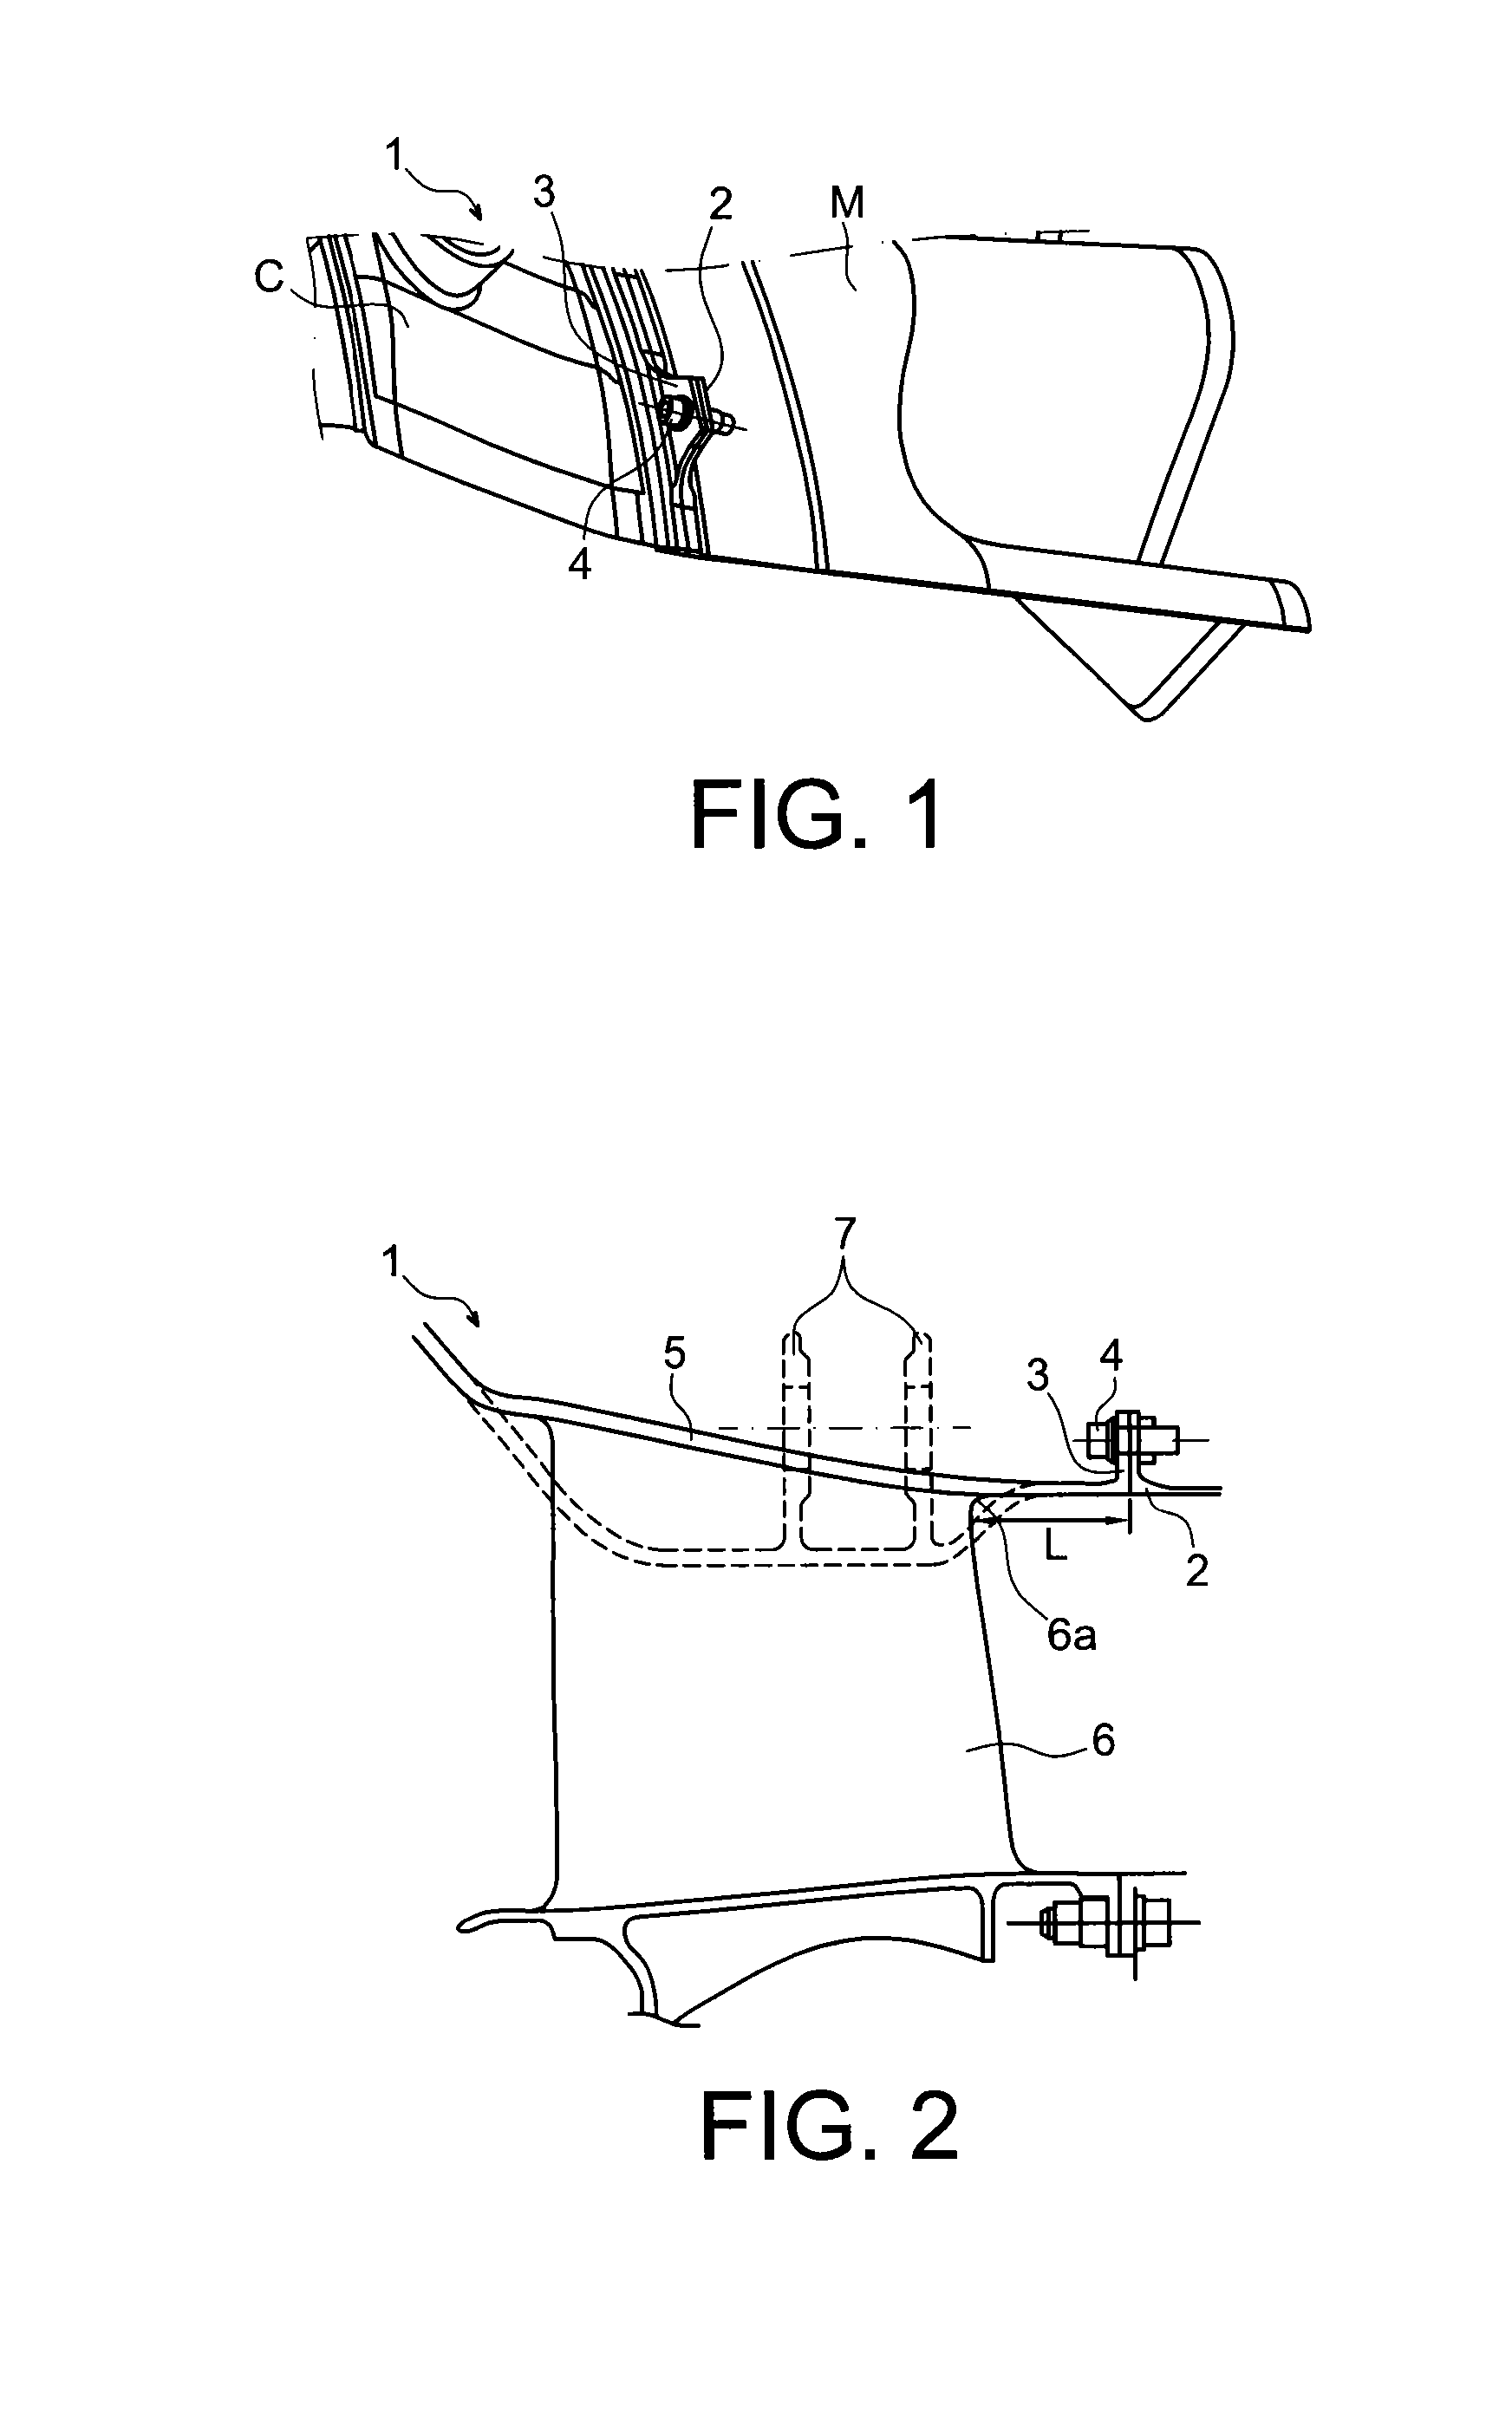 Method for assembling a nozzle and an exhaust case of a turbomachine